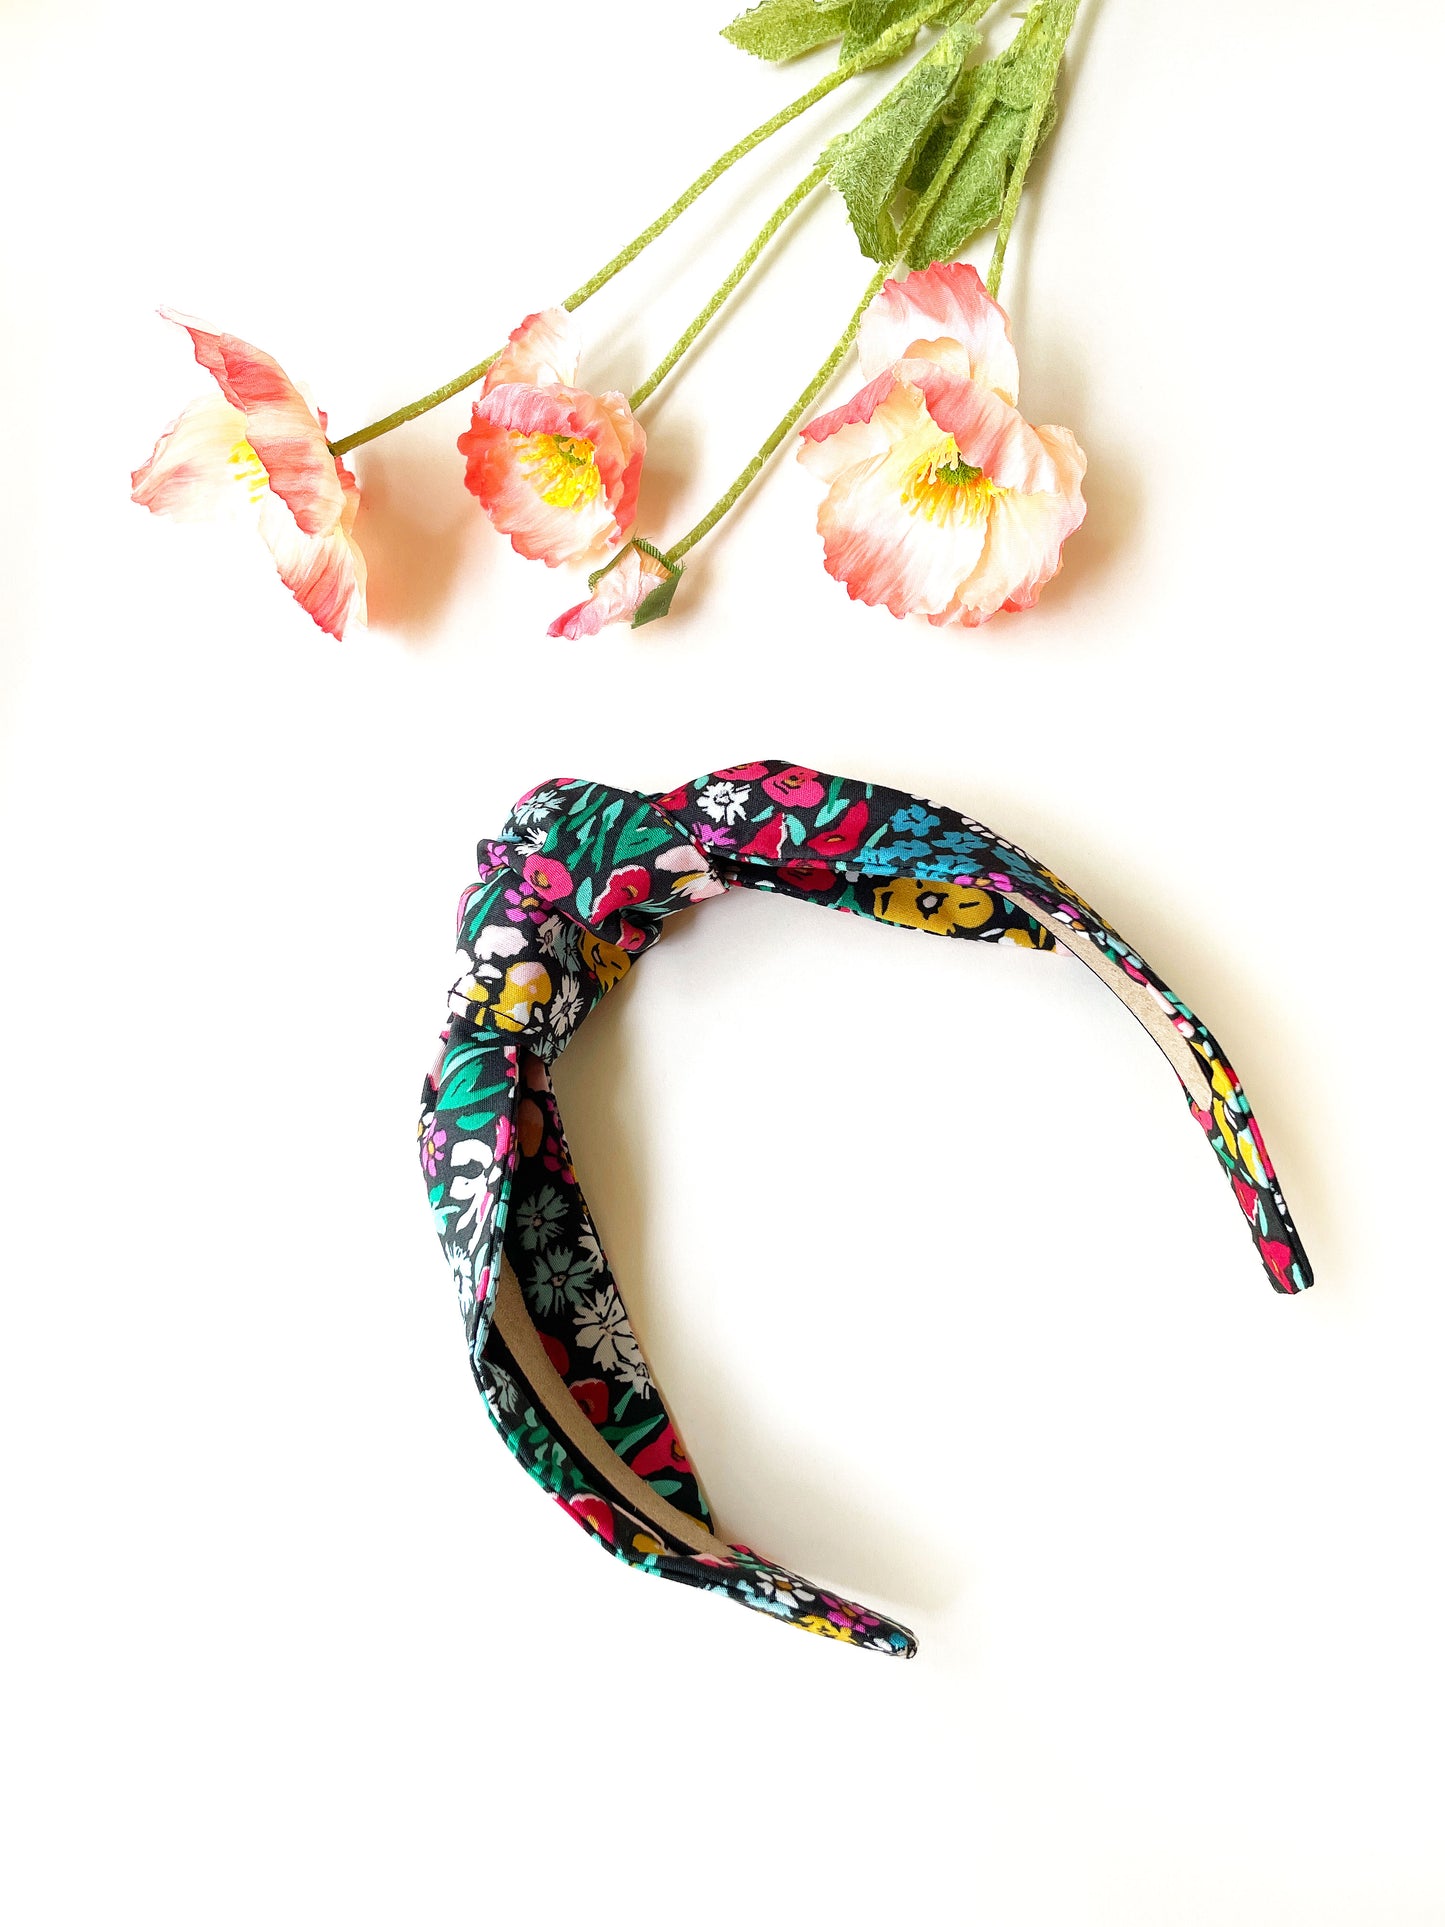 A black handmade knotted headband with a colorful floral print next to pink flowers.